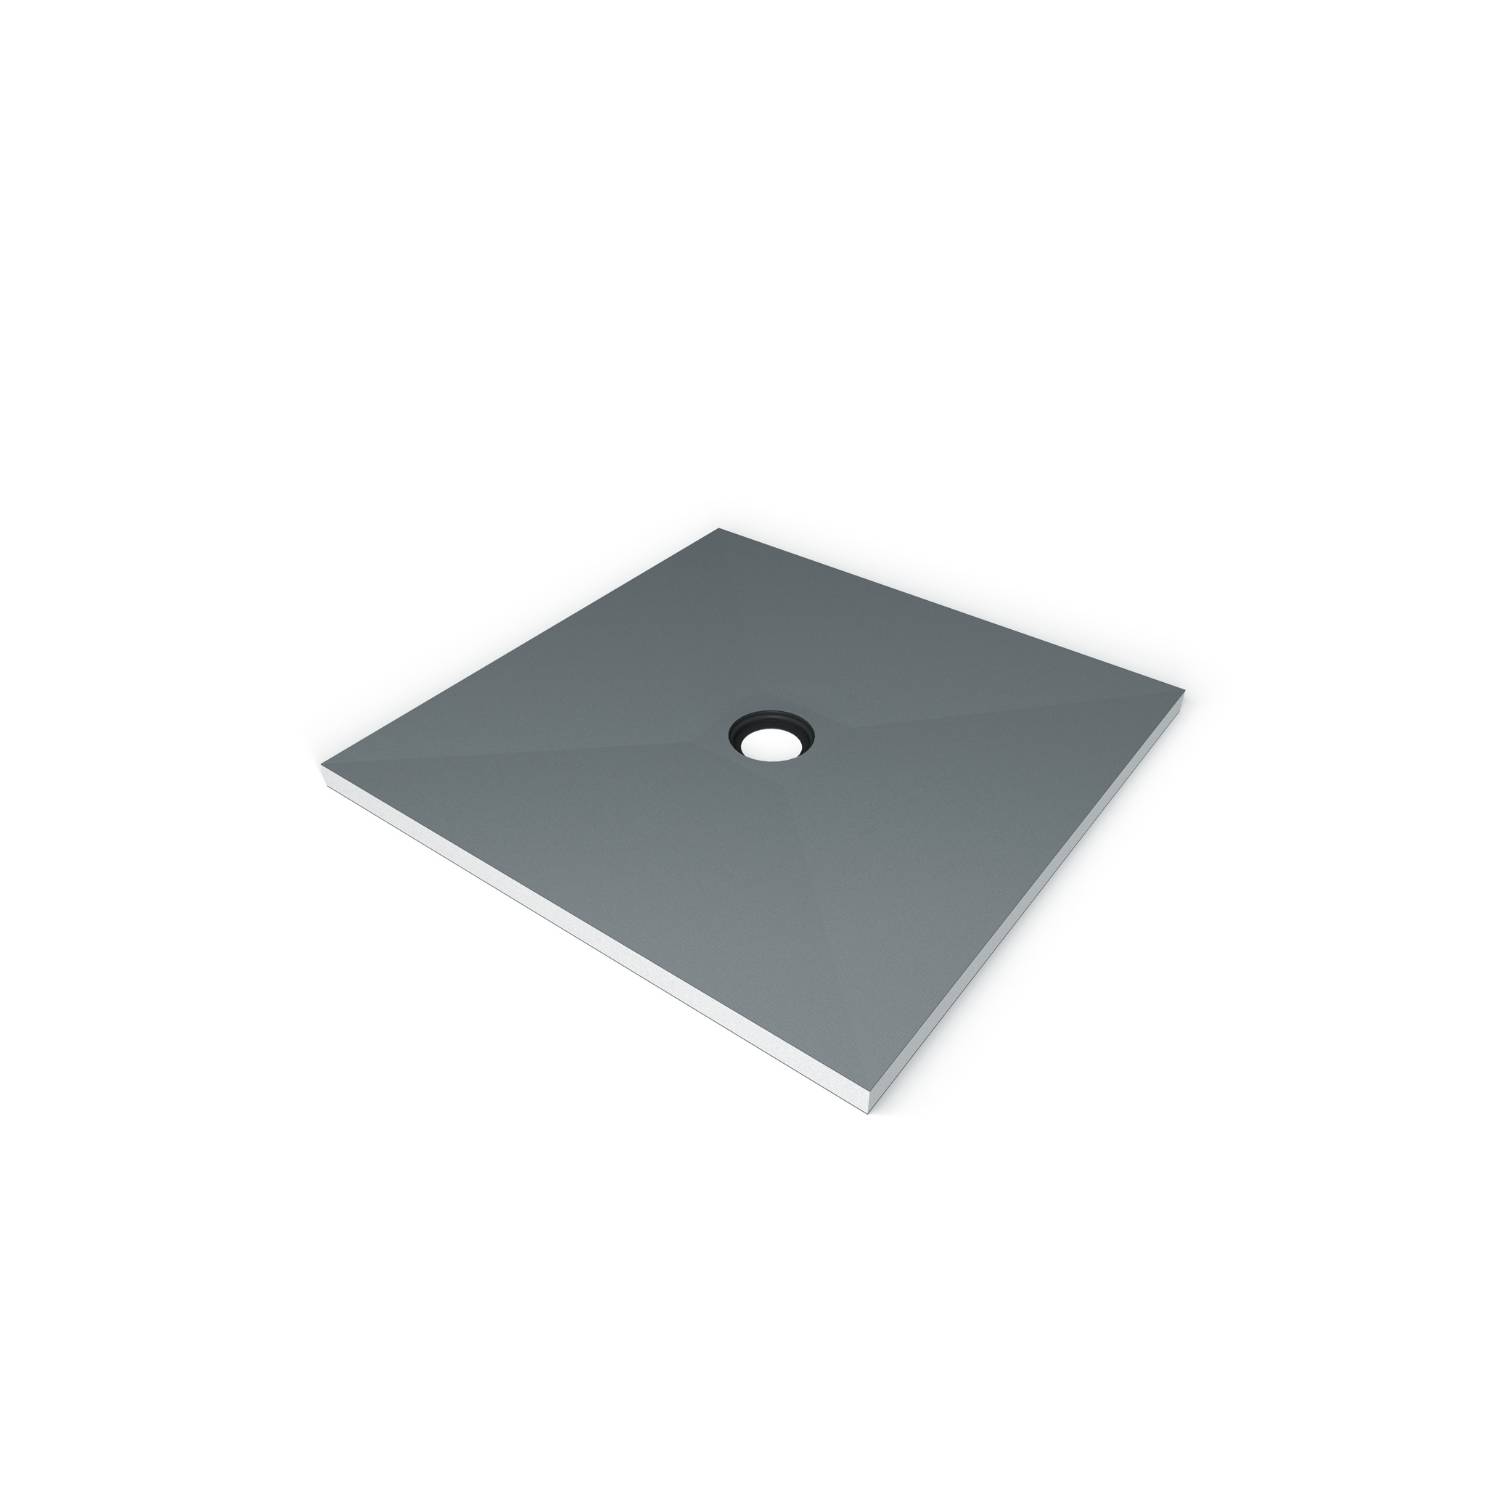 wedi Solso – Shower Element for PVC Covering - shower tray former